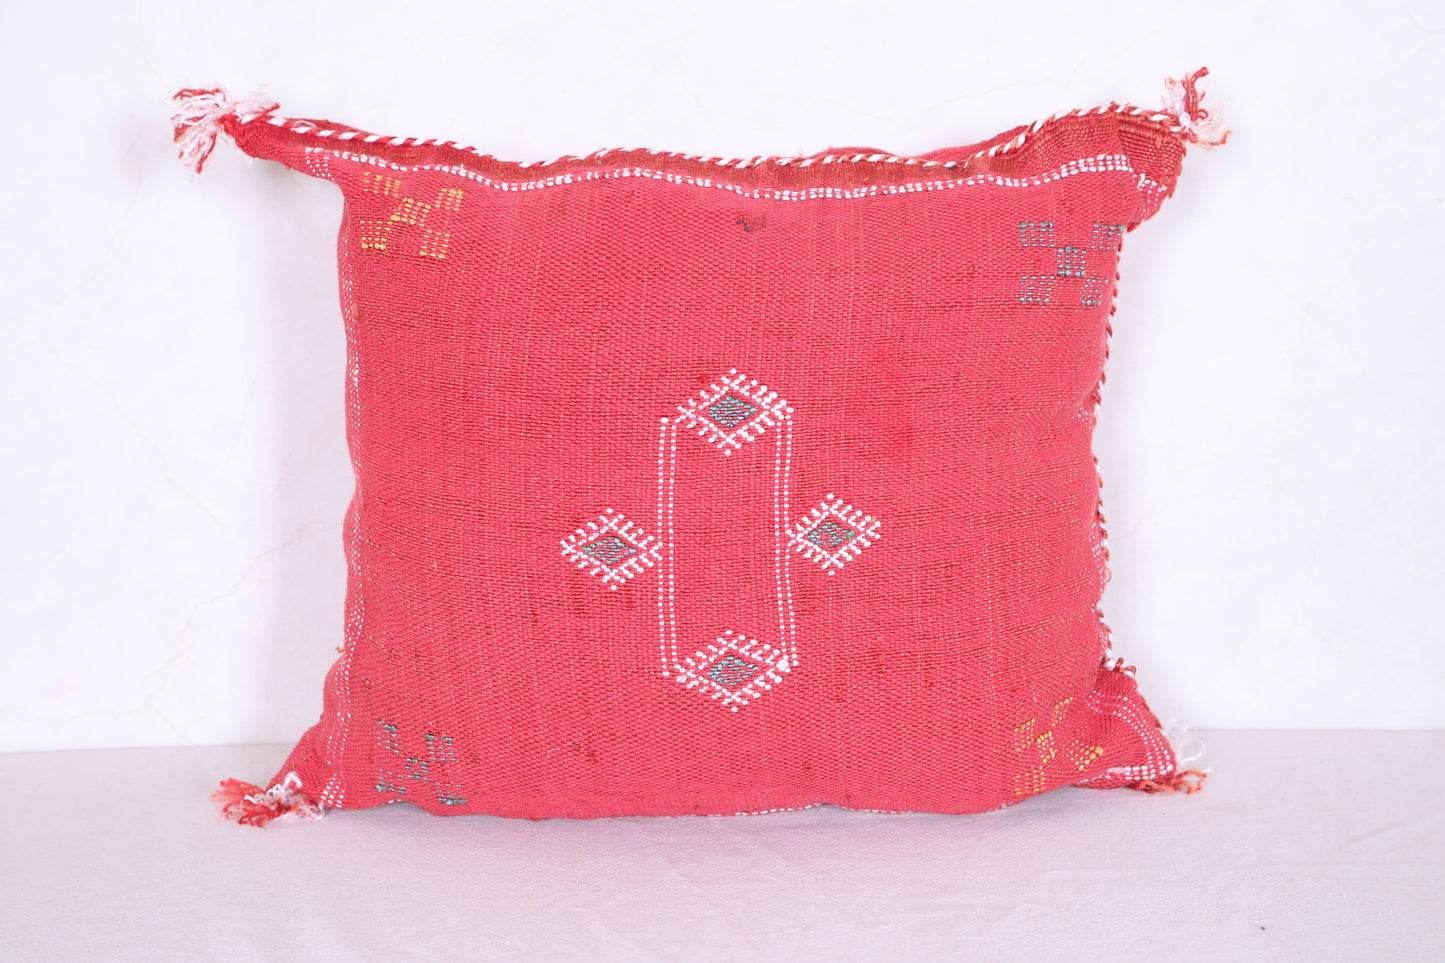 Moroccan handmade kilim pillow 16.1 INCHES X 18.5 INCHES